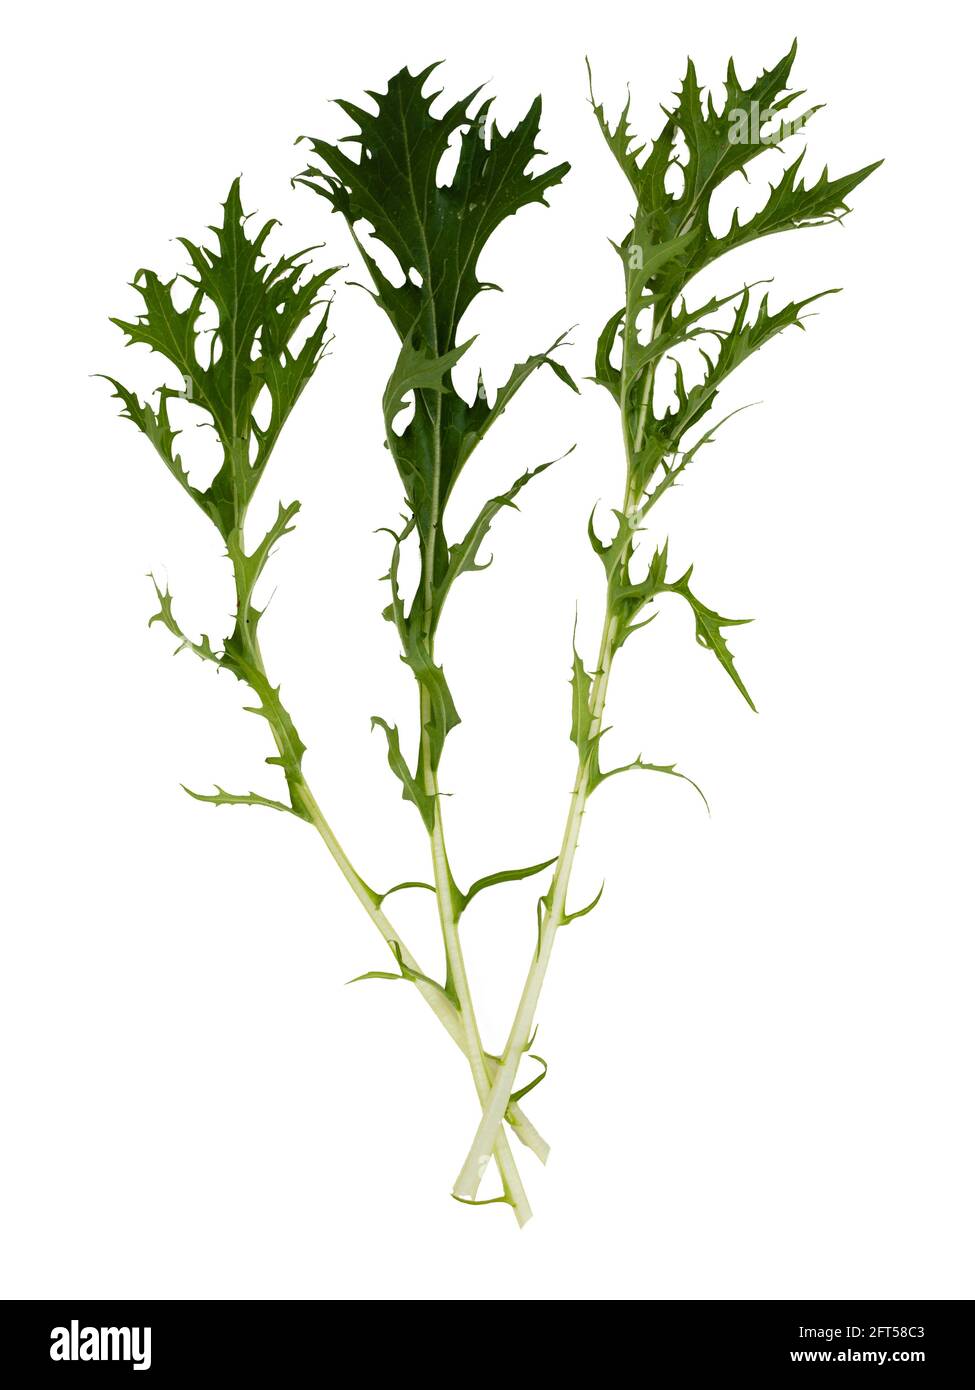 Freshly picked leaves of the organically grown salad mizuna,  Brassica rapa var. japonica, on a white background Stock Photo